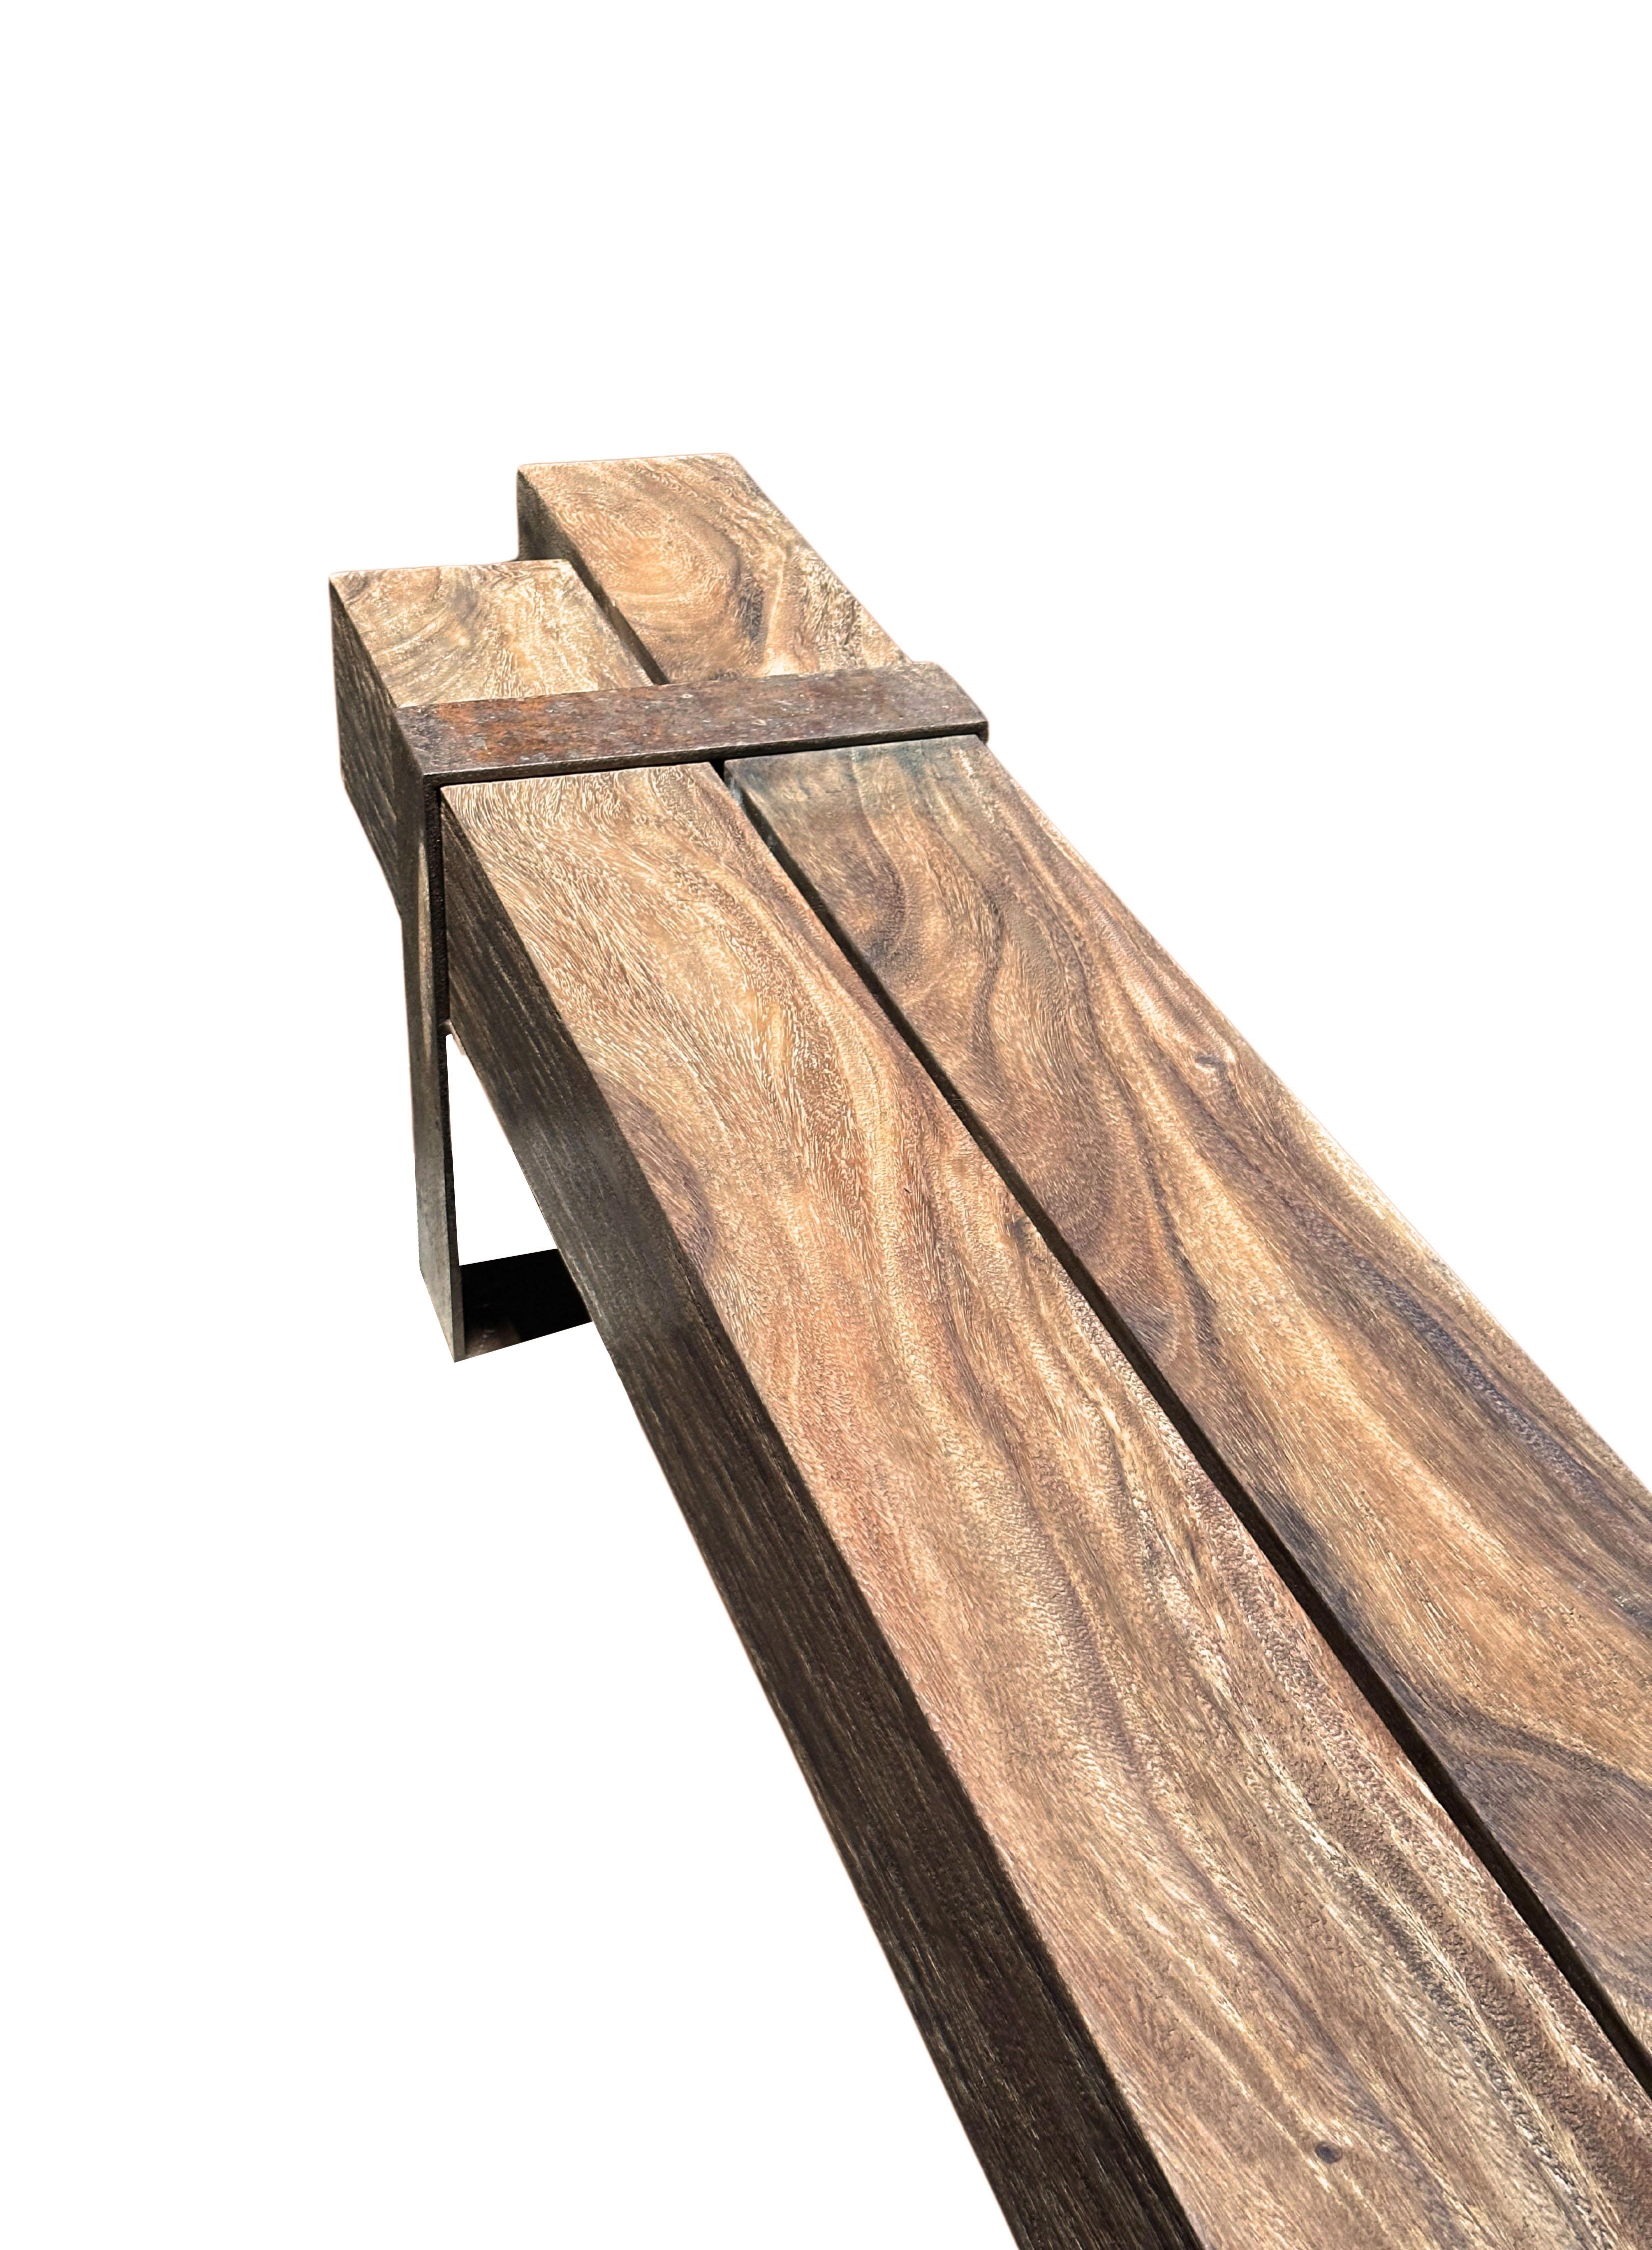 Other Sculptural Suar Wood Bench with Steel legs, Modern Organic For Sale